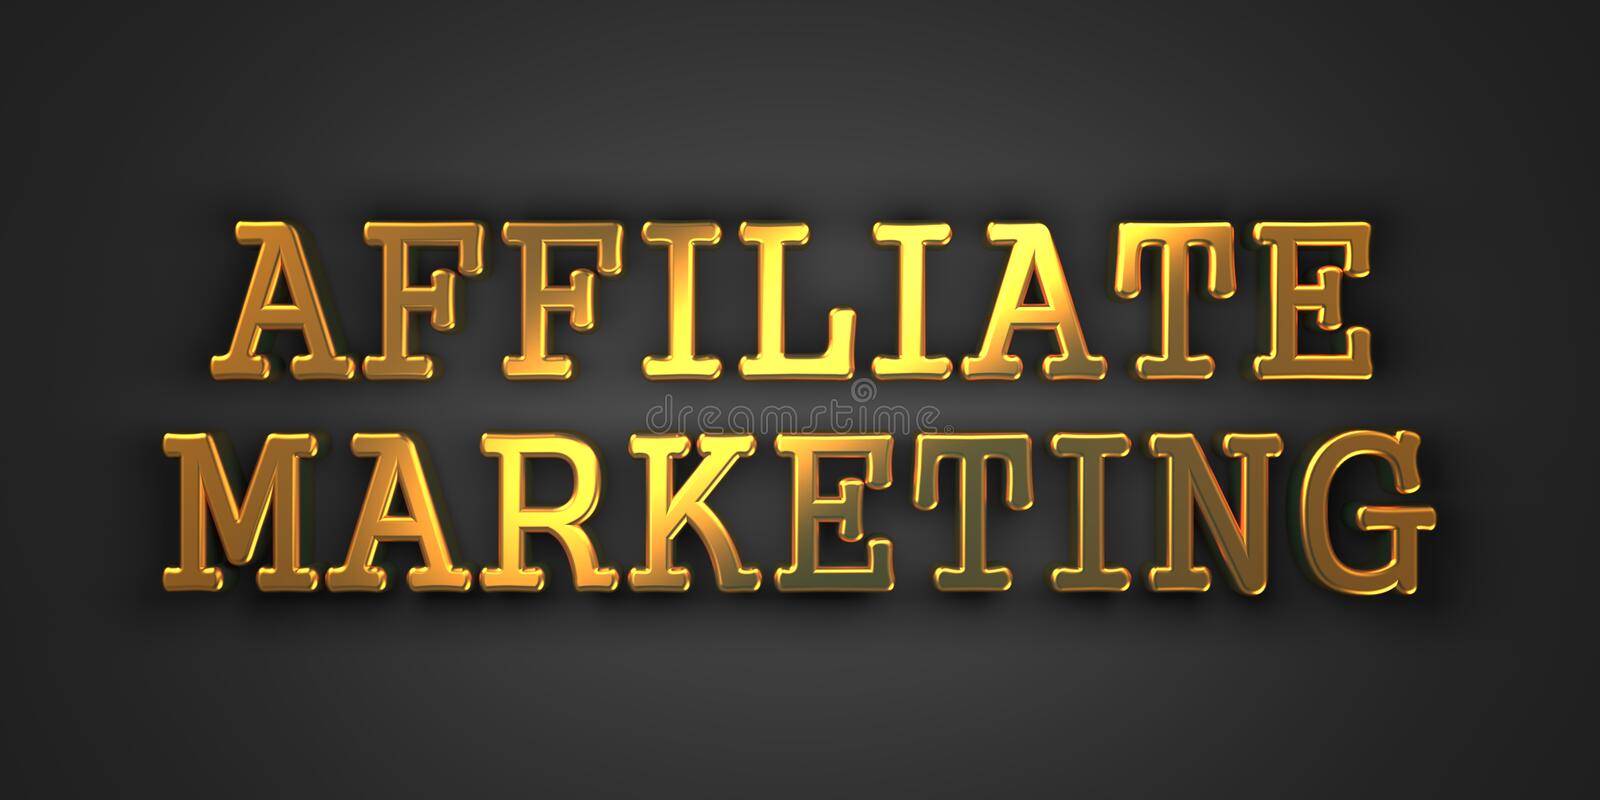 Thinking Outside The Box with Affiliate Marketing